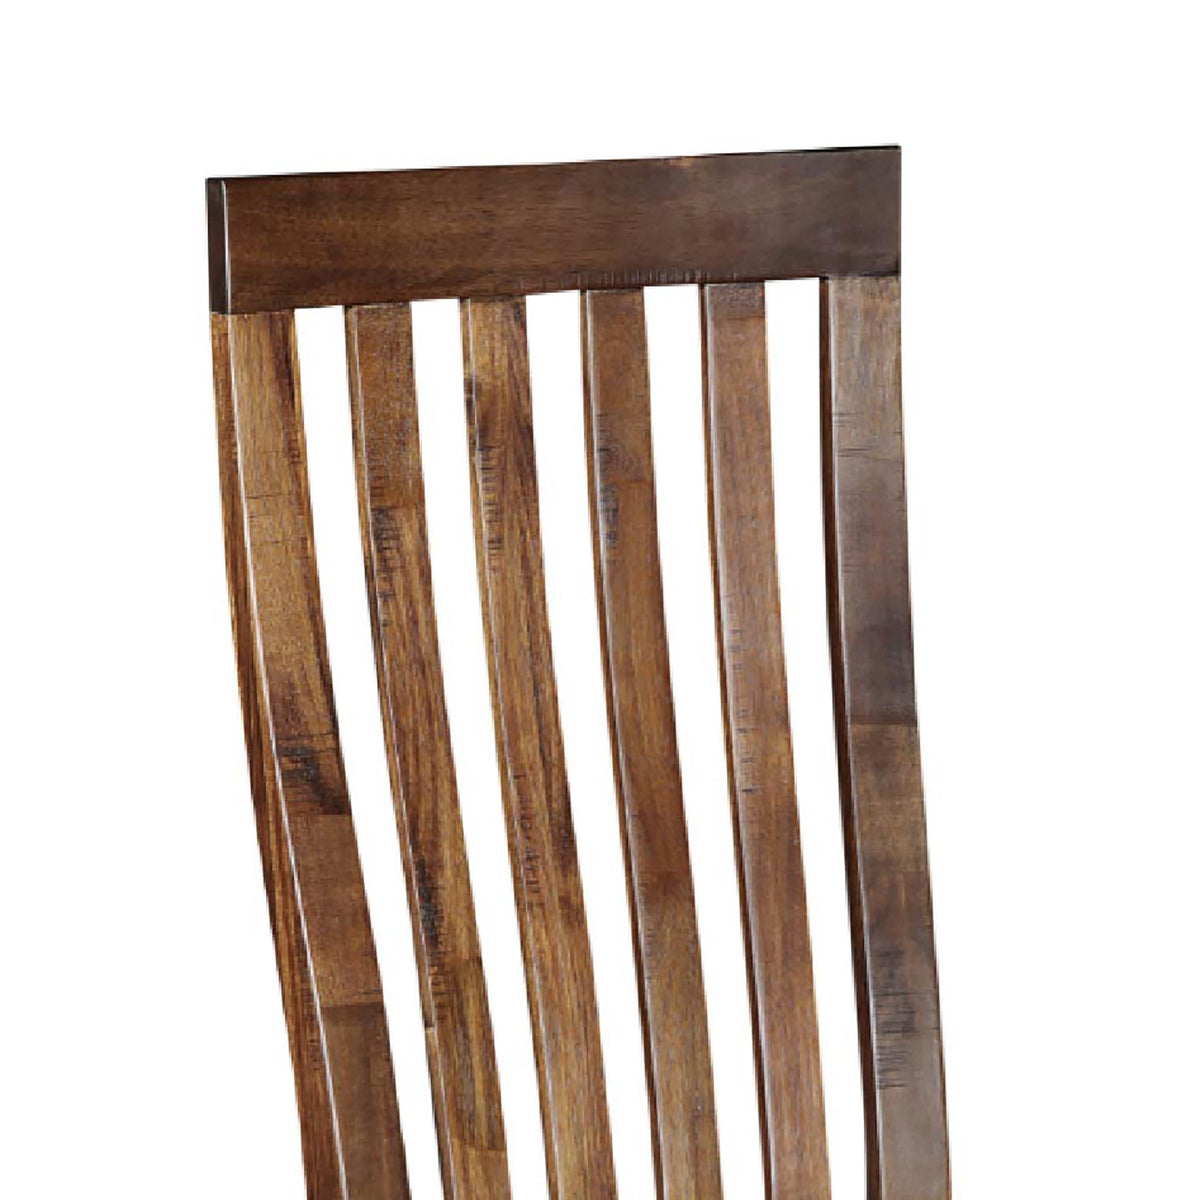 Ladock Dining Chair - Close Up of Slatted Back